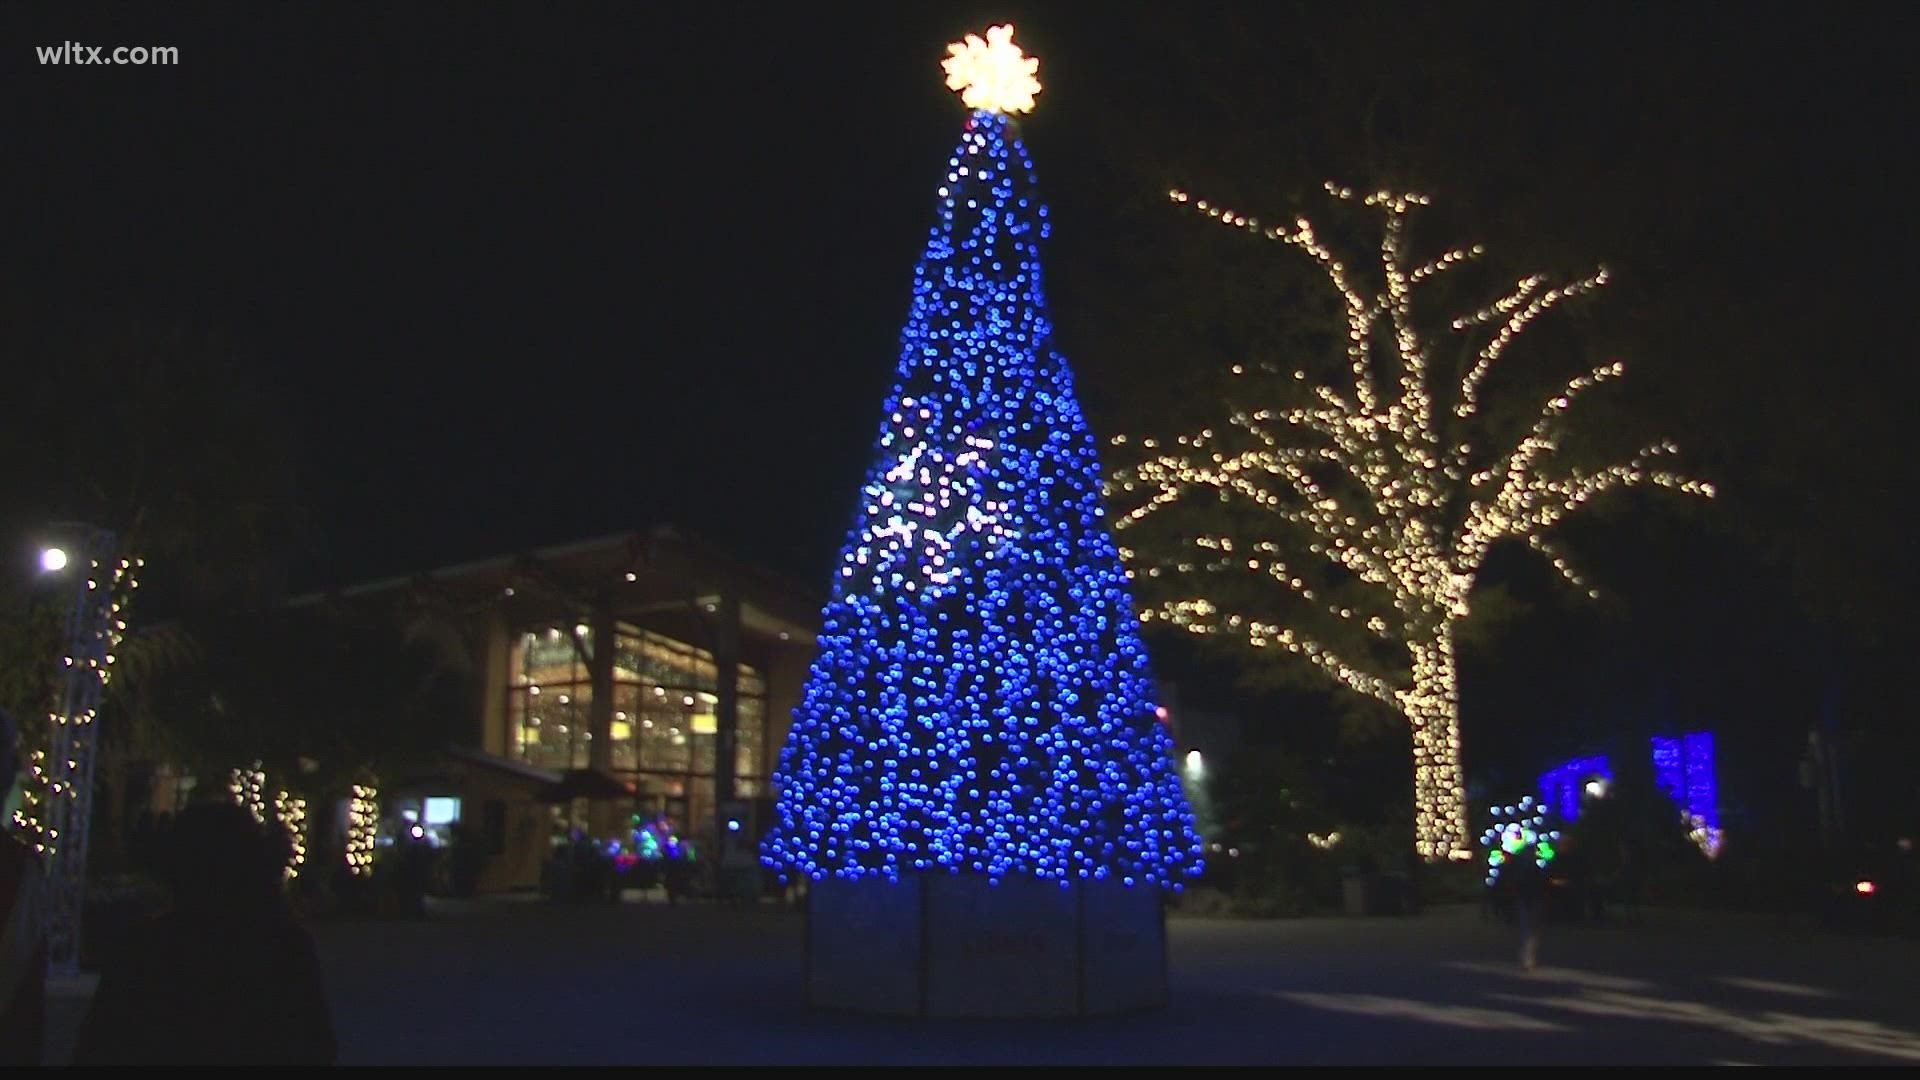 They're celebrating the holidays with their annual 'Lights Before Christmas' event.